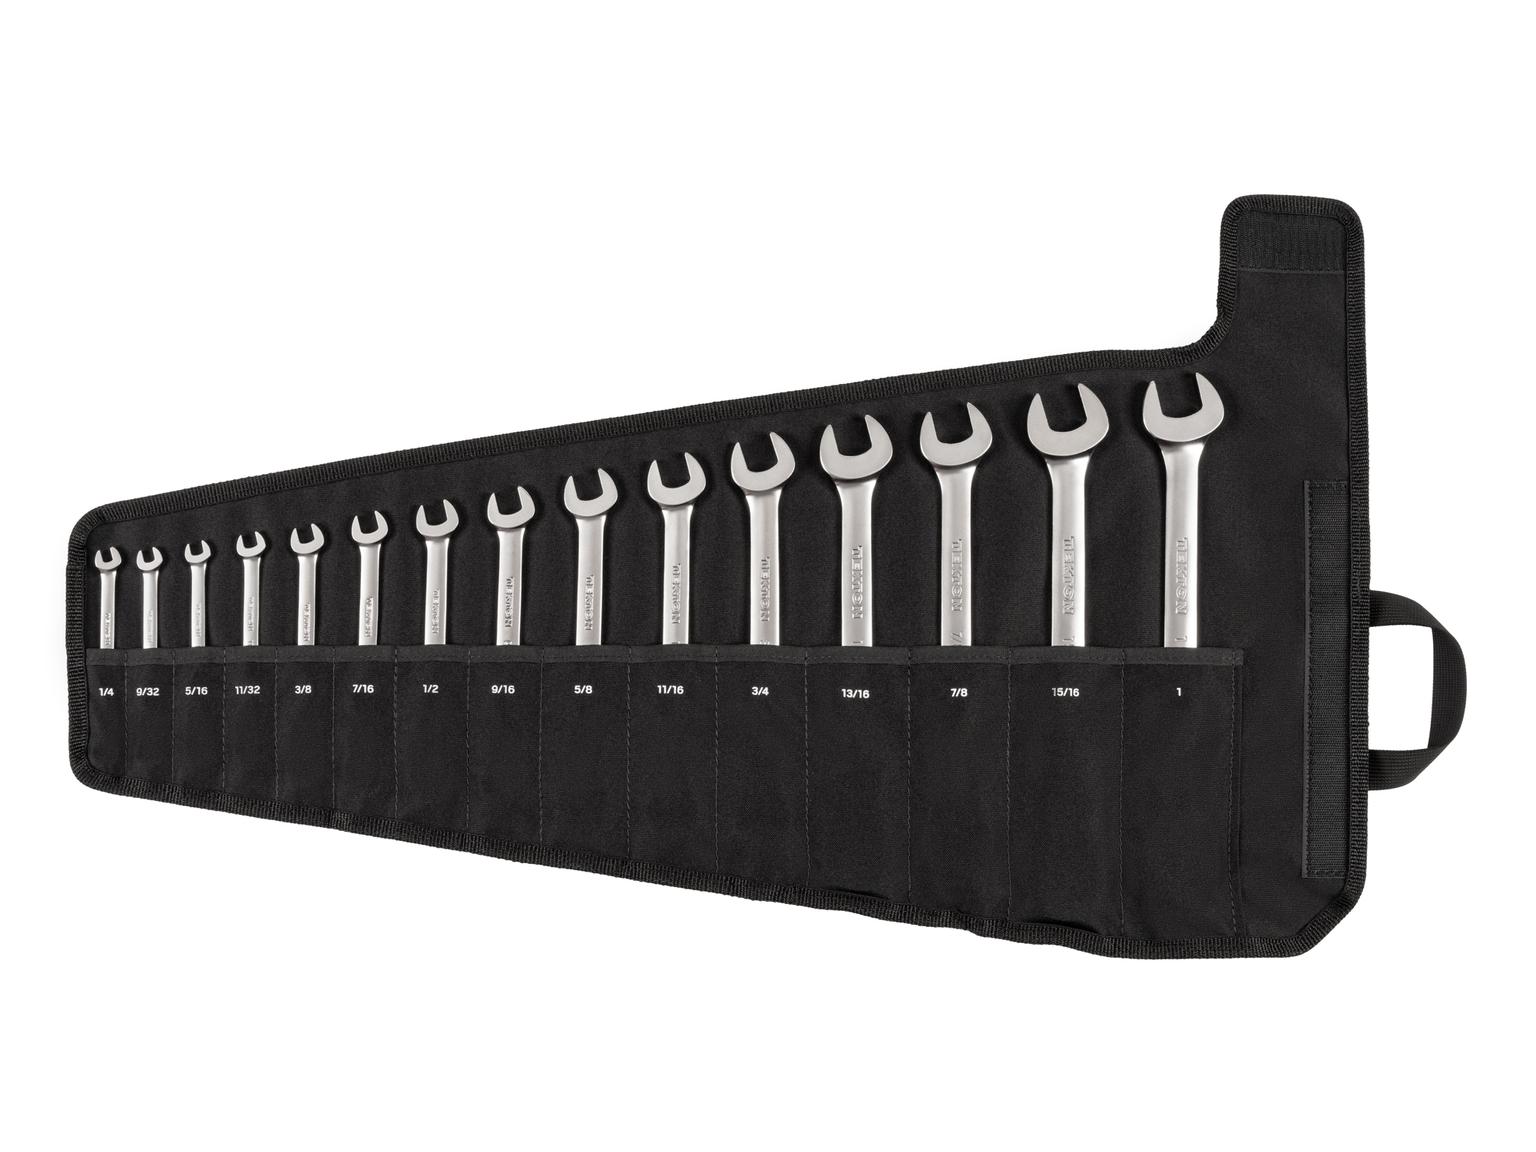 TEKTON WRC94401-T Reversible 12-Point Ratcheting Combination Wrench Set with Pouch, 15-Piece (1/4-1 in.)